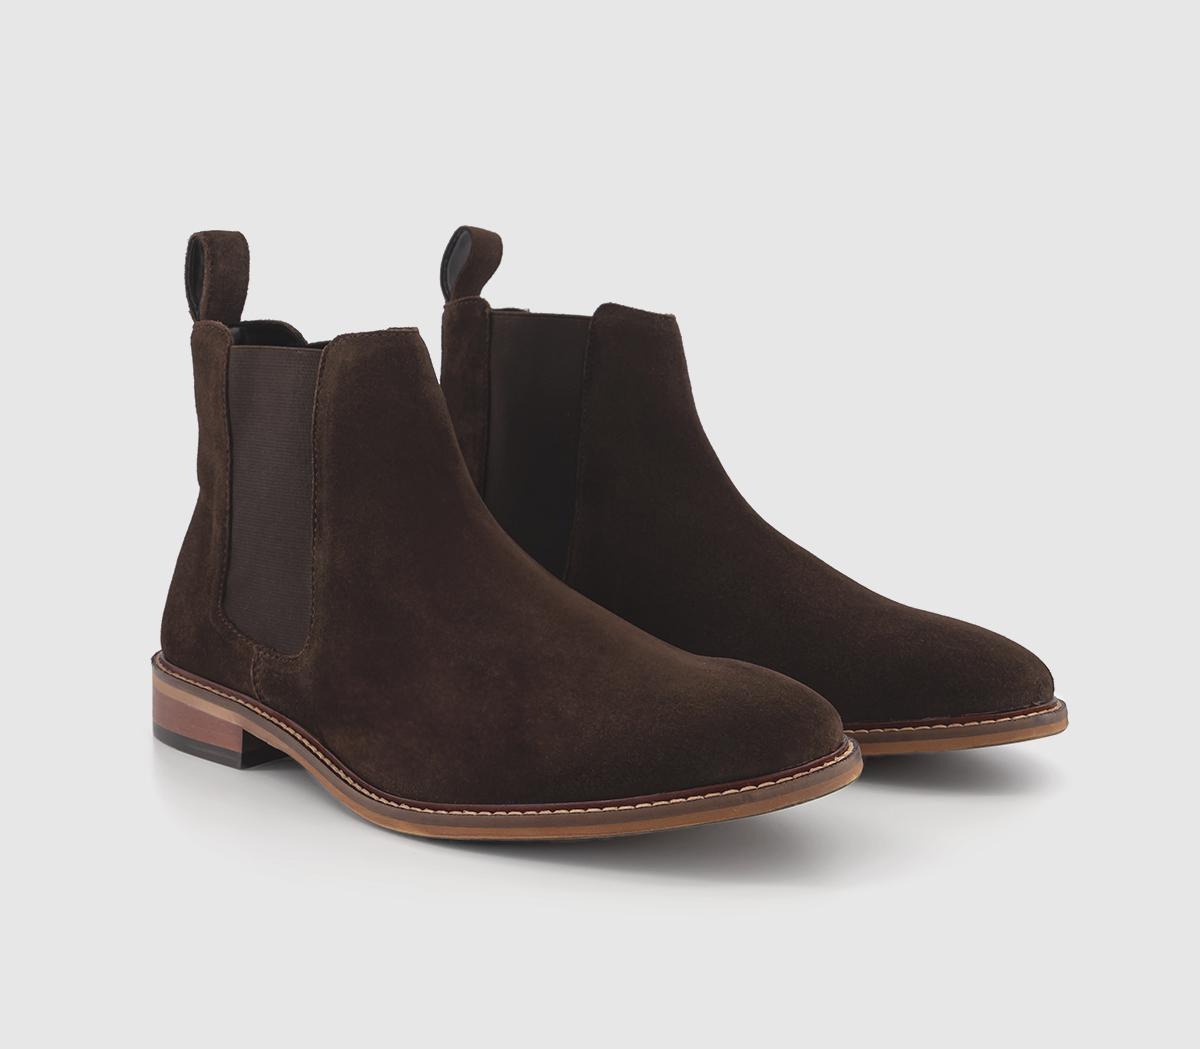 OFFICE Beacon Chelsea Boots Chocolate Suede - Men’s Boots